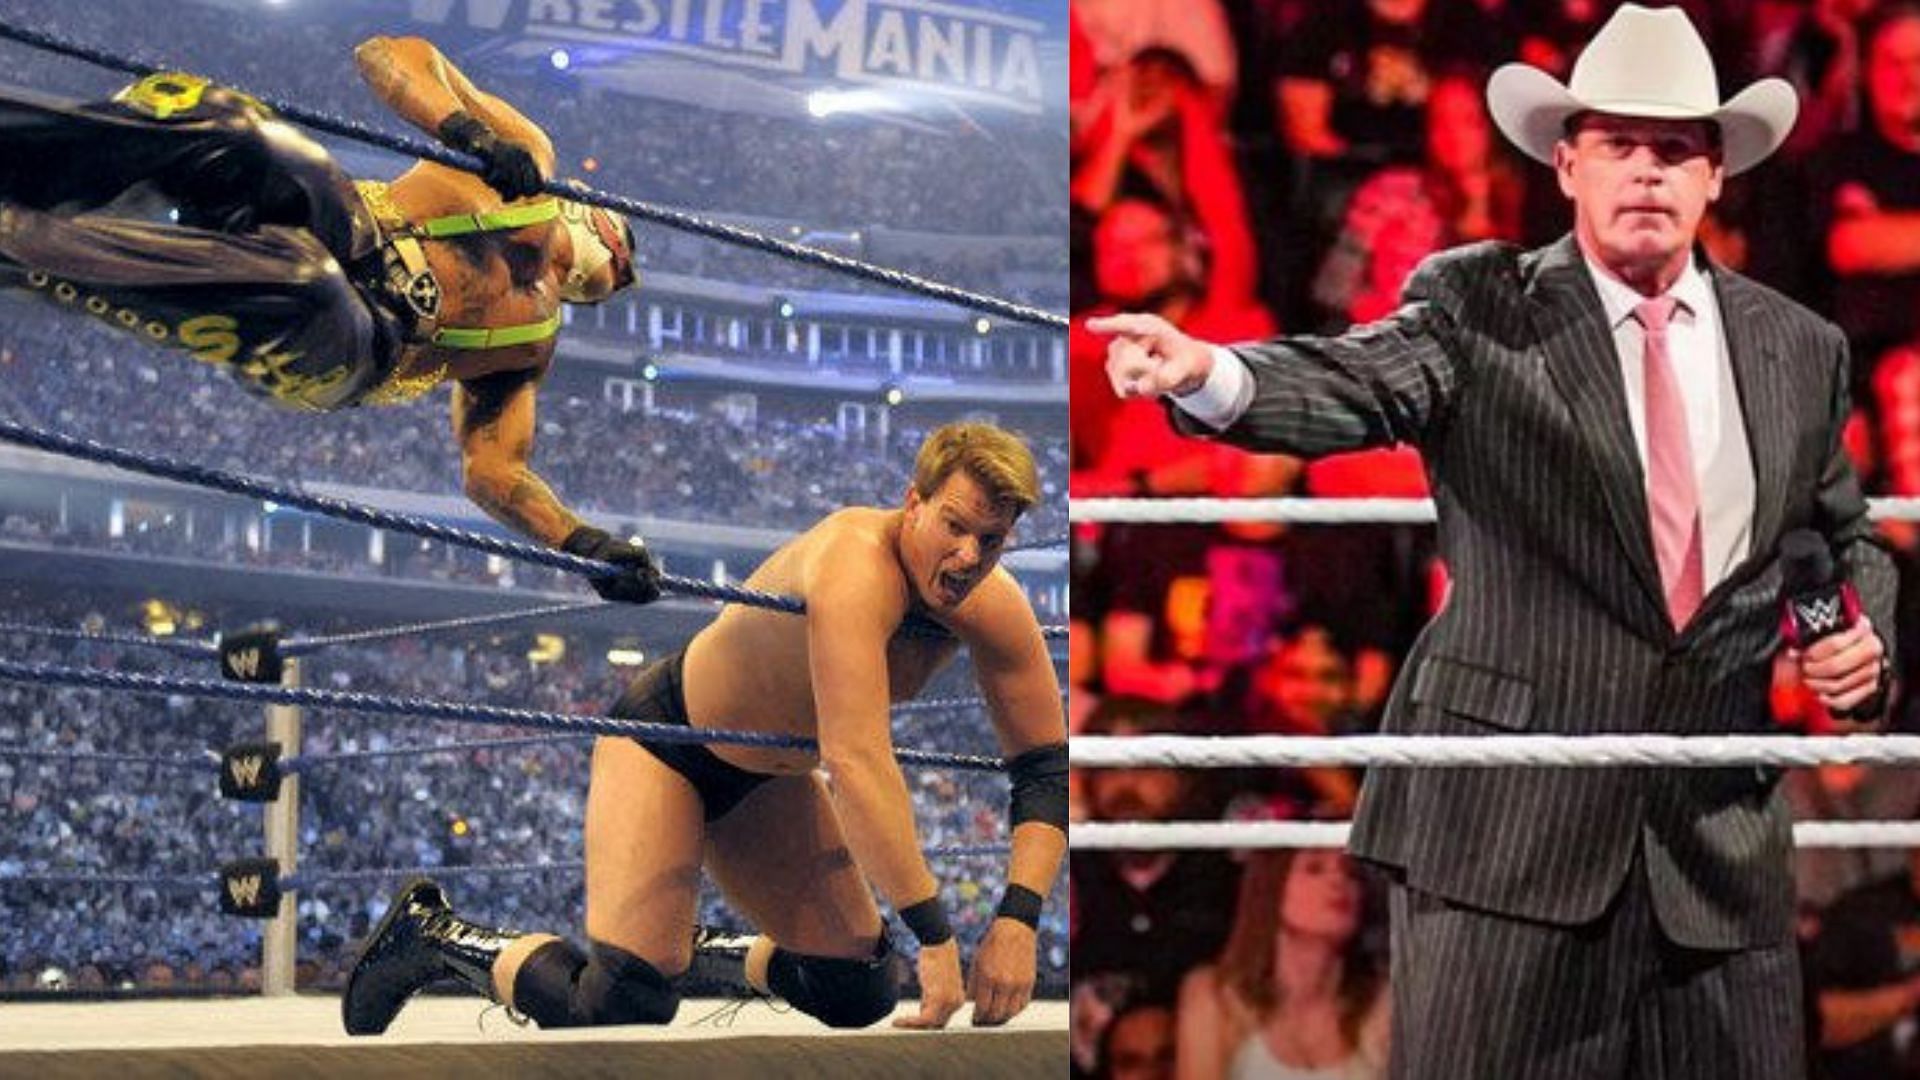 JBL retired on his own terms after WrestleMania 25